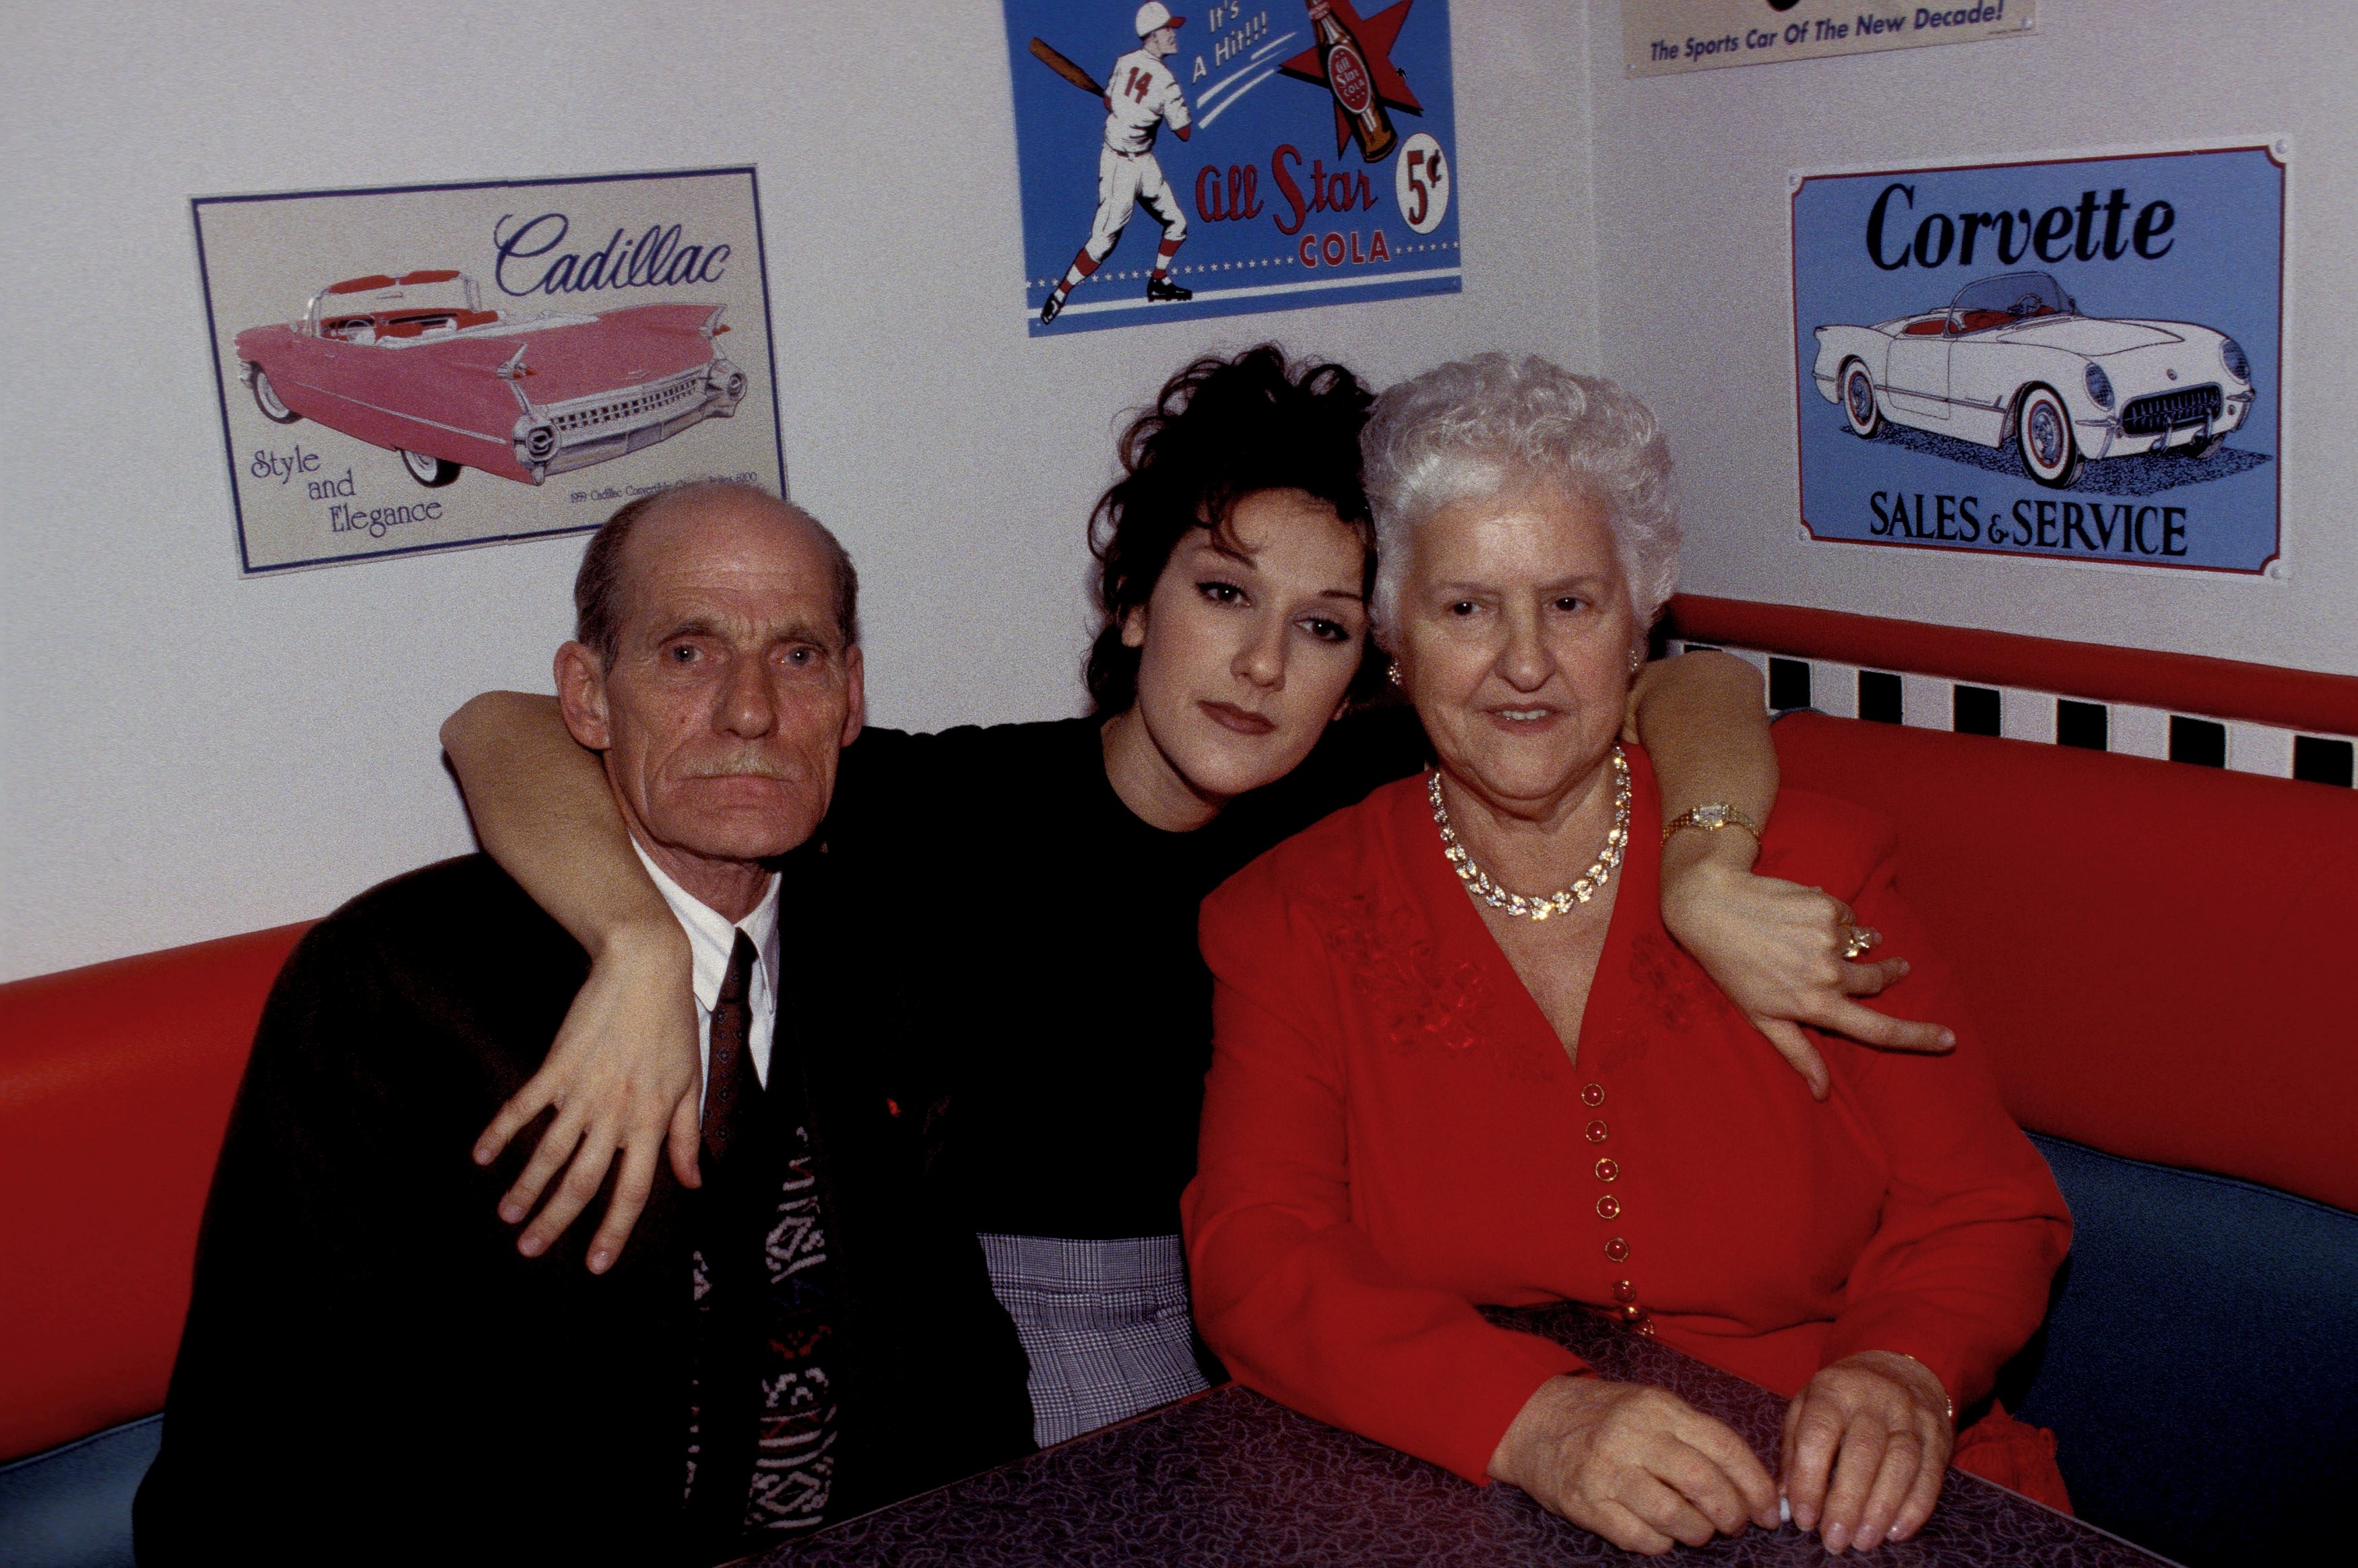 Celine Dion celebrates her 26th birthday with Thérèse Tanguay-Dion and Adhemar Dion in her restaurant "Nickel's" in Montreal, Canada, on March 7, 1994. | Source: Getty Images